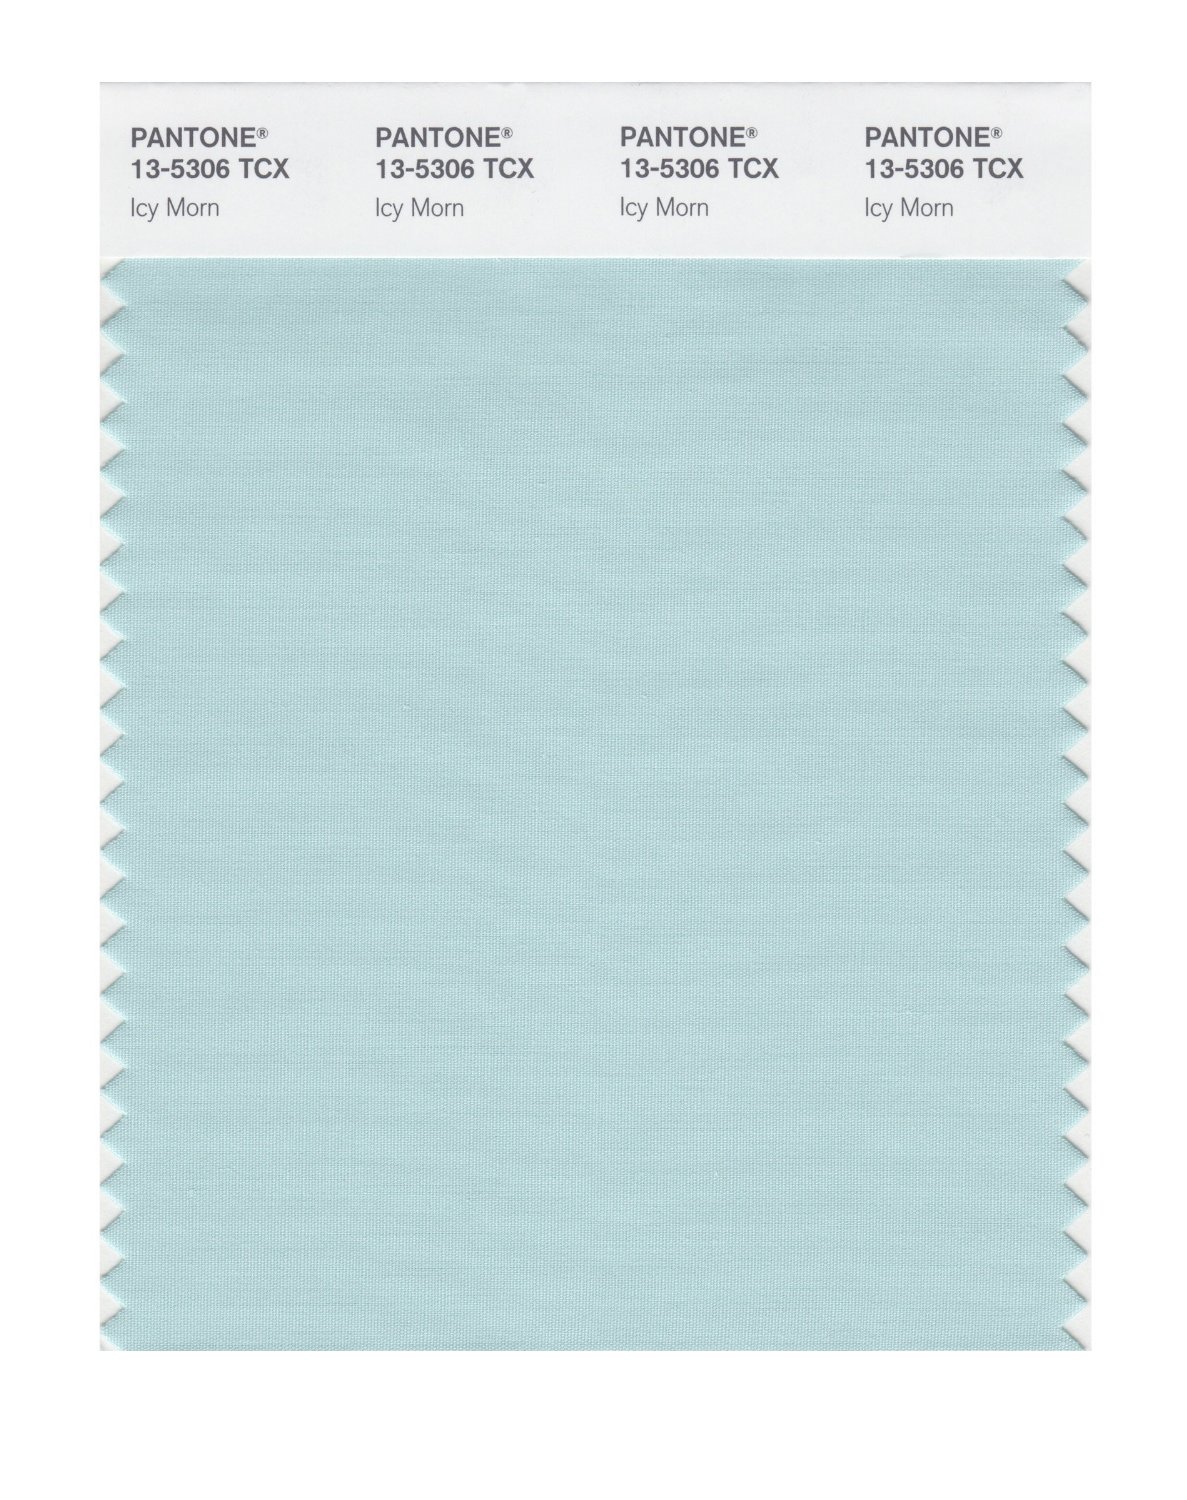 Pantone Cotton Swatch 13-5306 Icy Morn